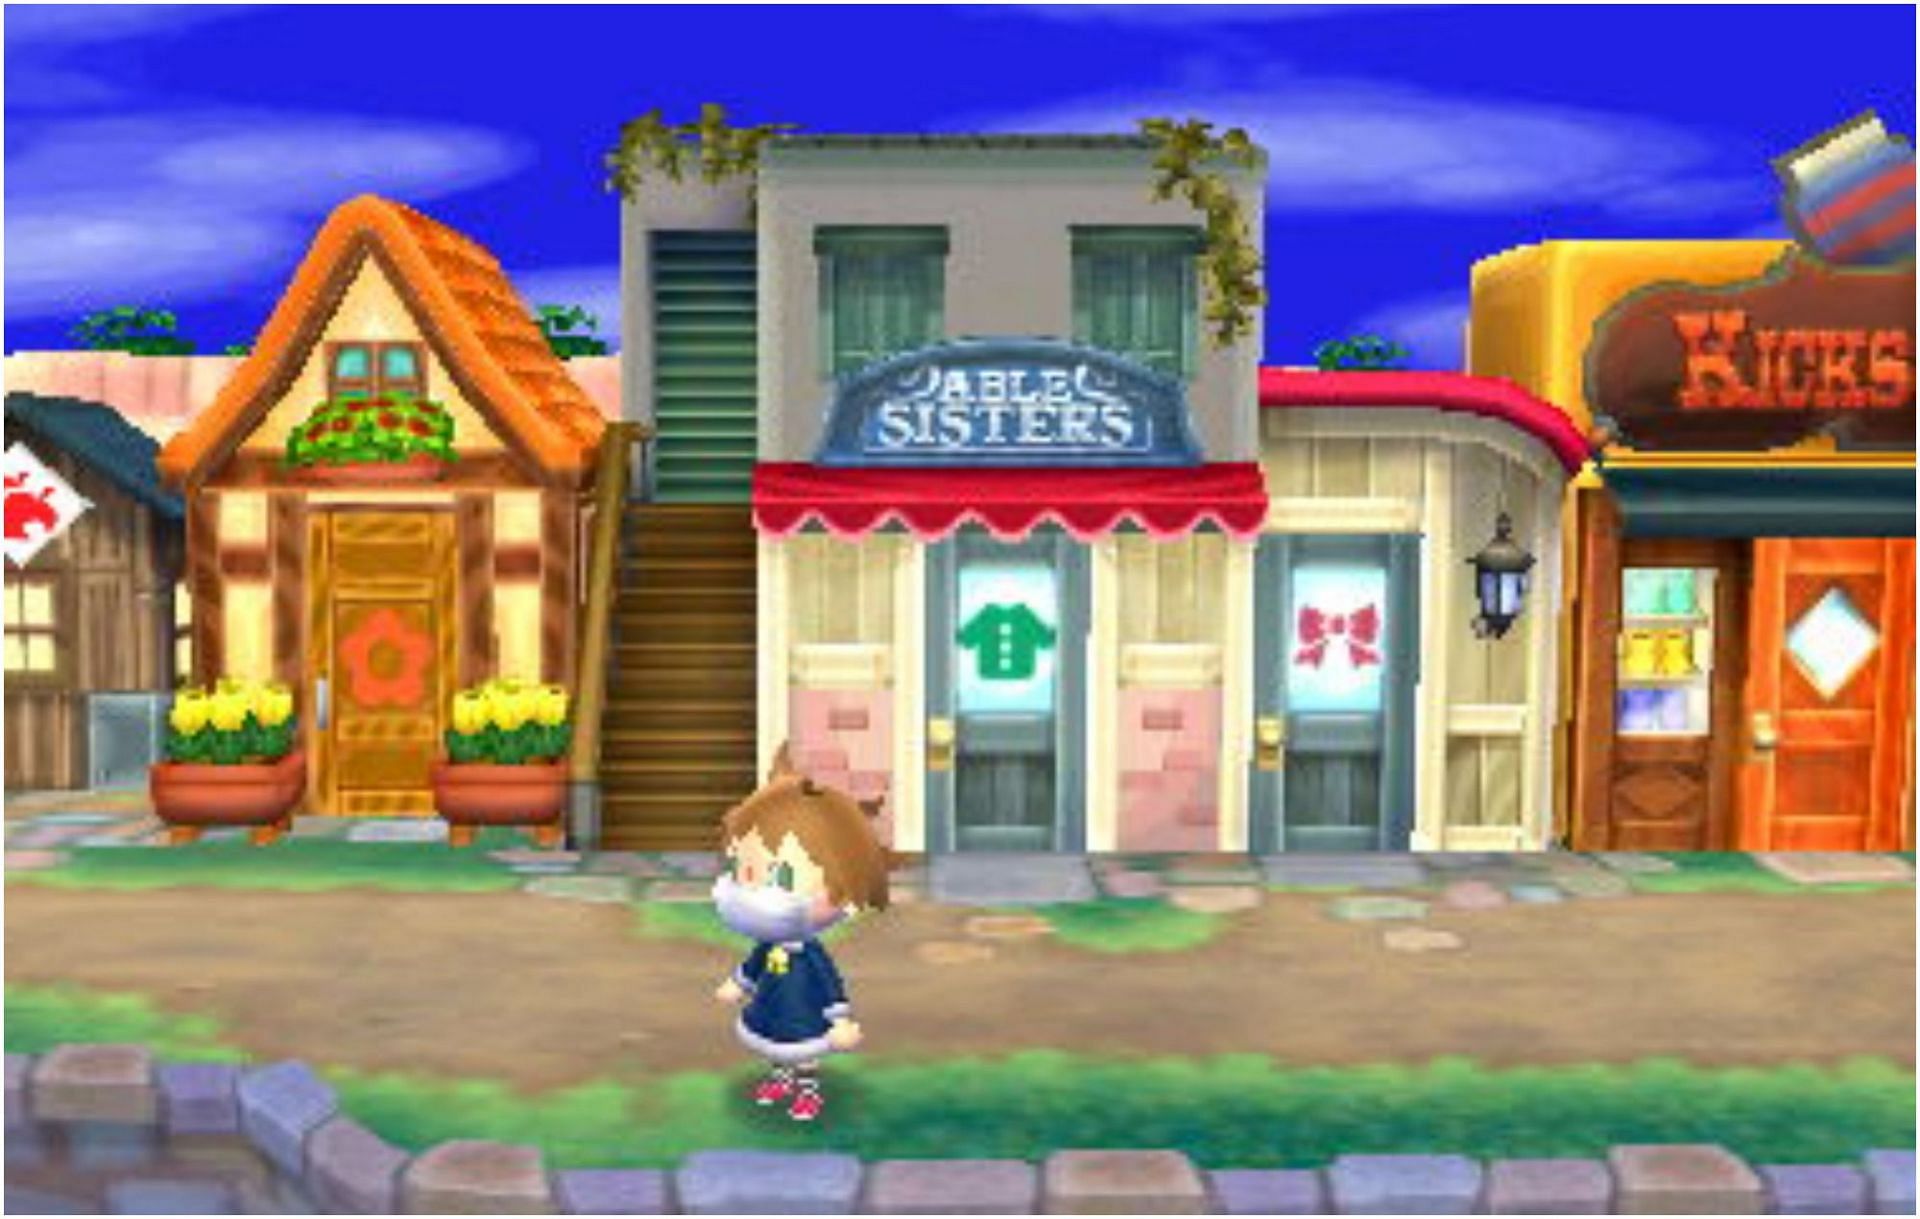 The Sloppy Set was prominently featured in Animal Crossing: New Leaf. Image via Nintendo